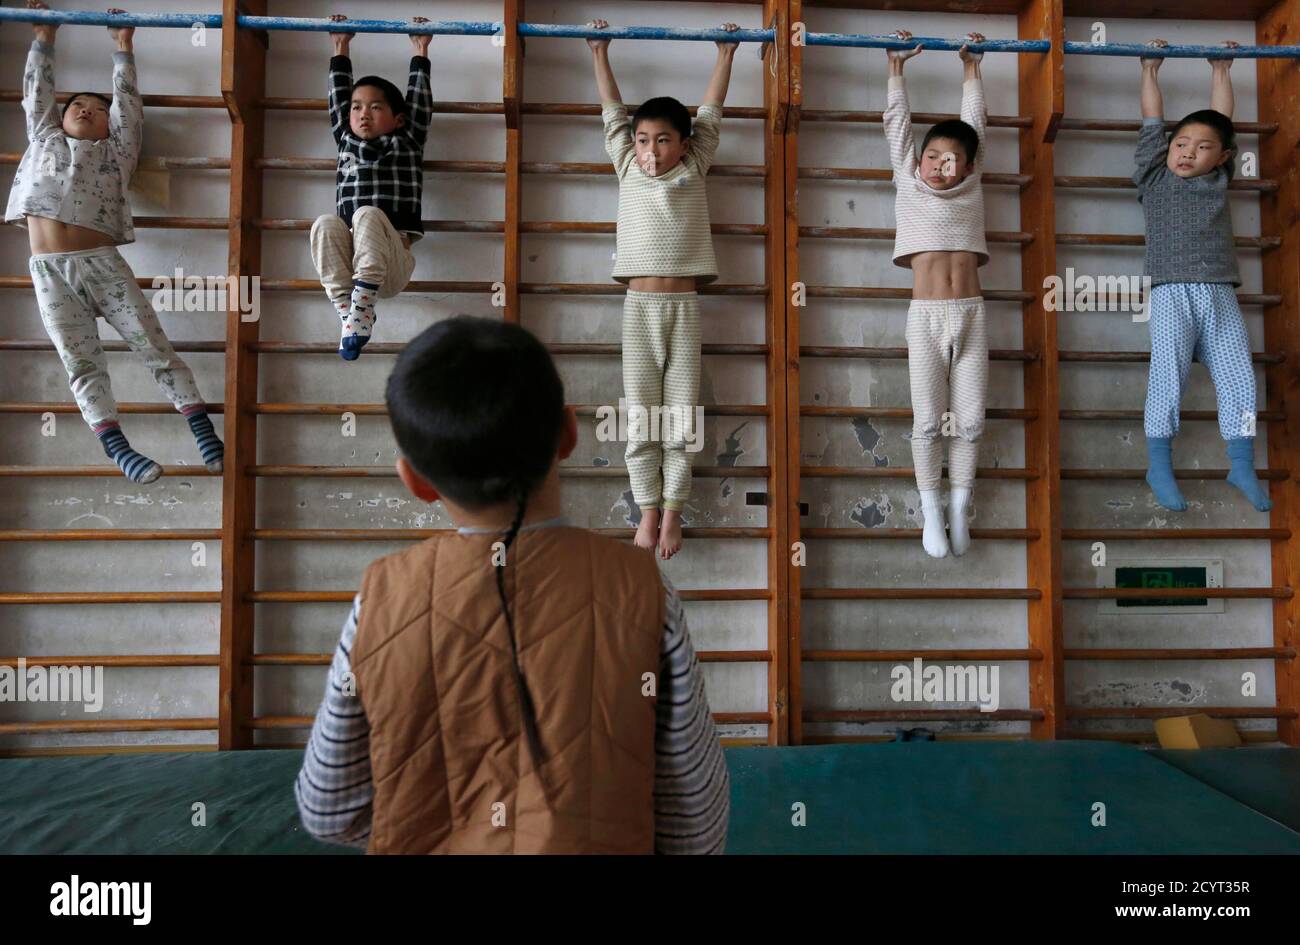 A group of young gymnasts stretch themselves on wooden bars during an exercise session at the gymnastics hall of a sports school in Jiaxing, Zhejiang province, February 28, 2013. Their class consists of children aged six to seven, who have been attending professional sports training for at least four years. Their daily schedule contains literacy and general knowledge classes in the morning and four hours of athletic training in the afternoon. REUTERS/William Hong (CHINA - Tags: SPORT ATHLETICS EDUCATION SOCIETY) Stock Photo